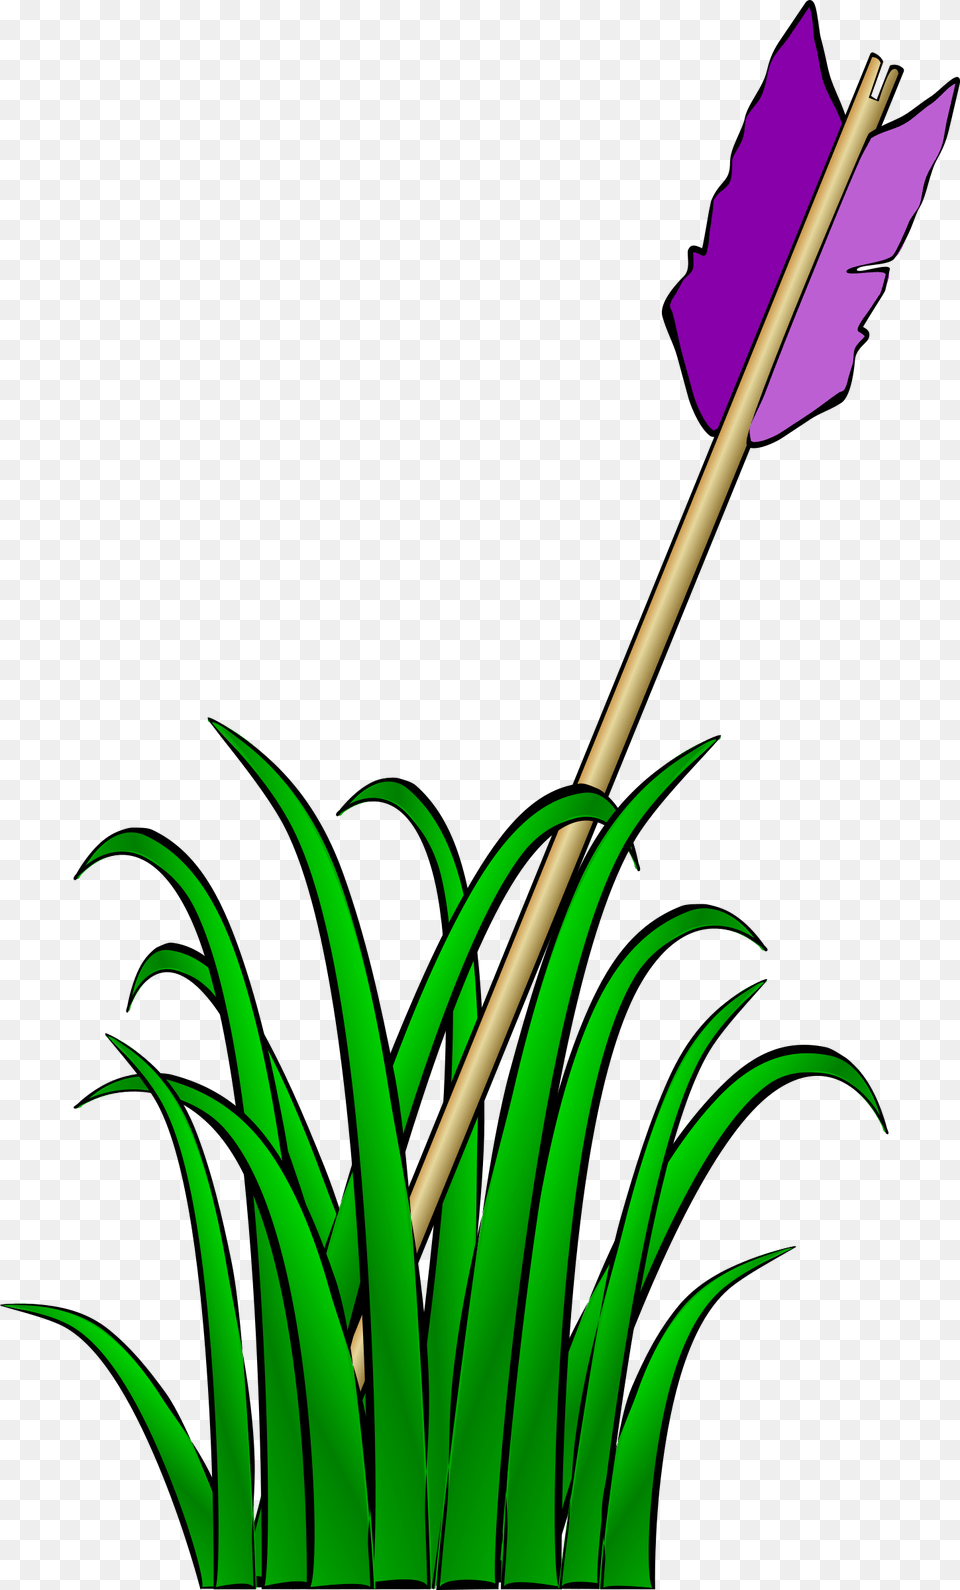 Arrow In The Grass Clip Art Grass Clip Art, Weapon, Spear, Smoke Pipe Png